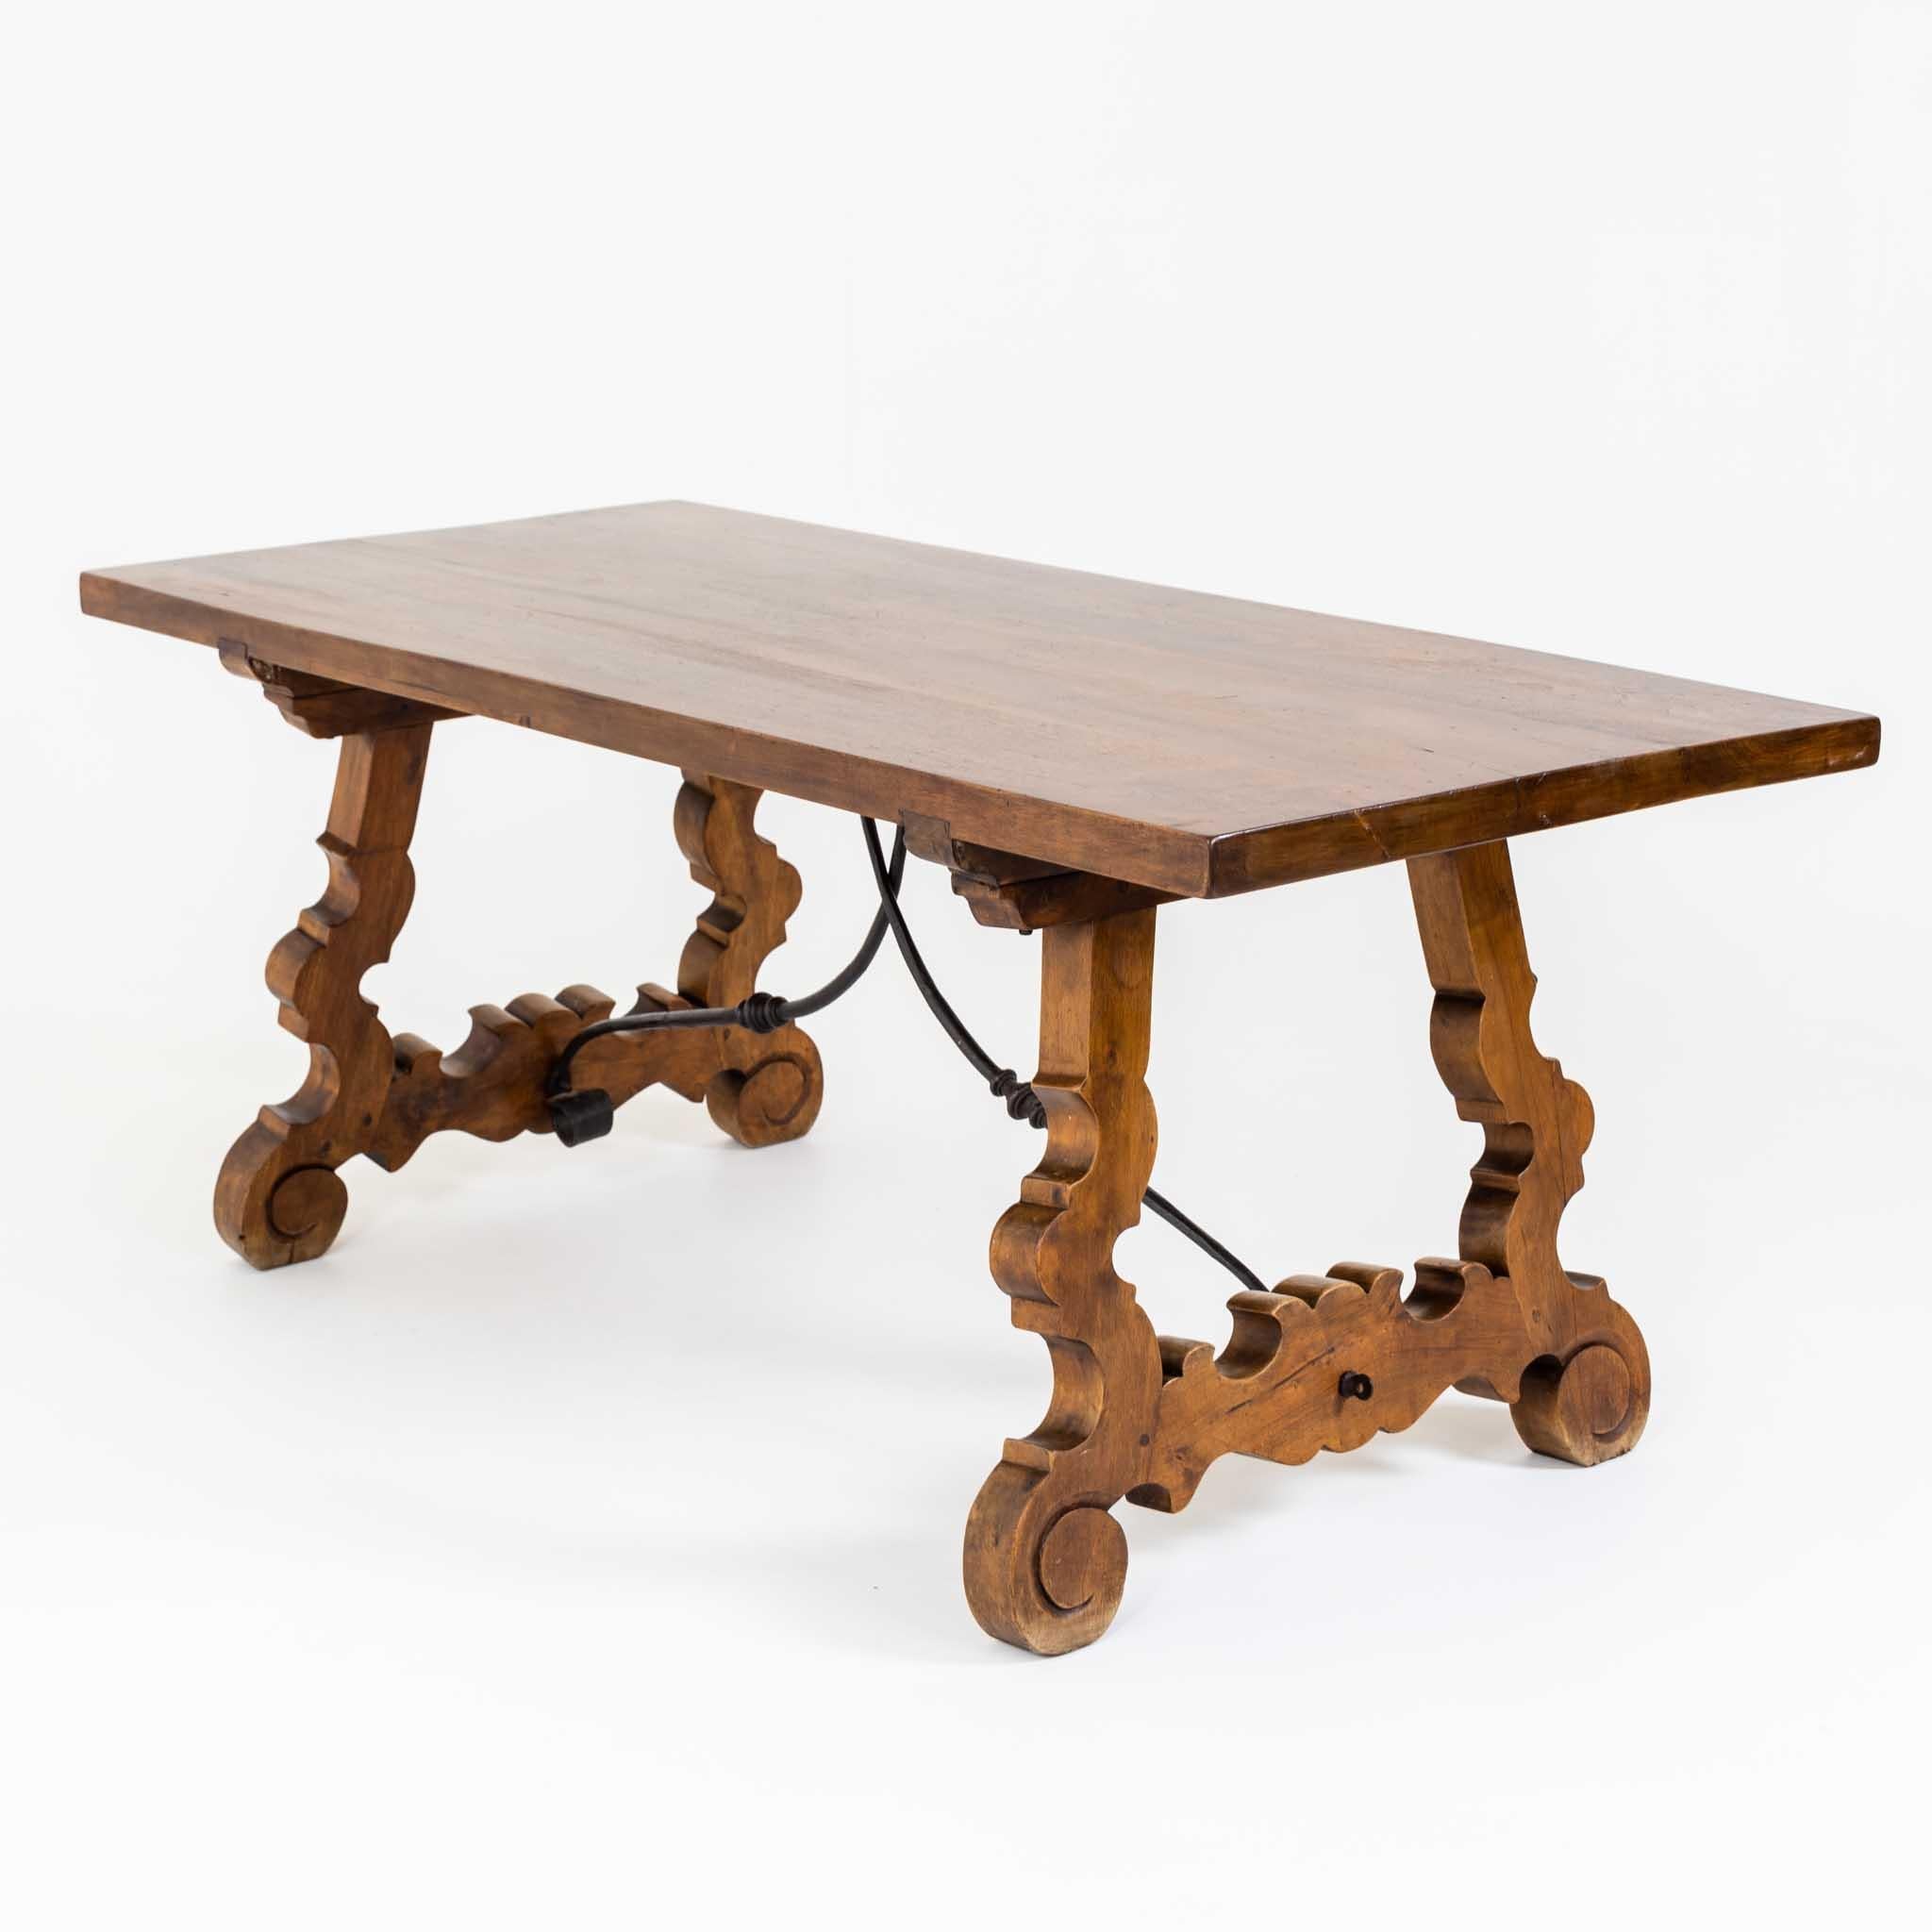 Baroque-style table in solid walnut, with rectangular table top on curved cut-out legs and curved iron intermediate strut.